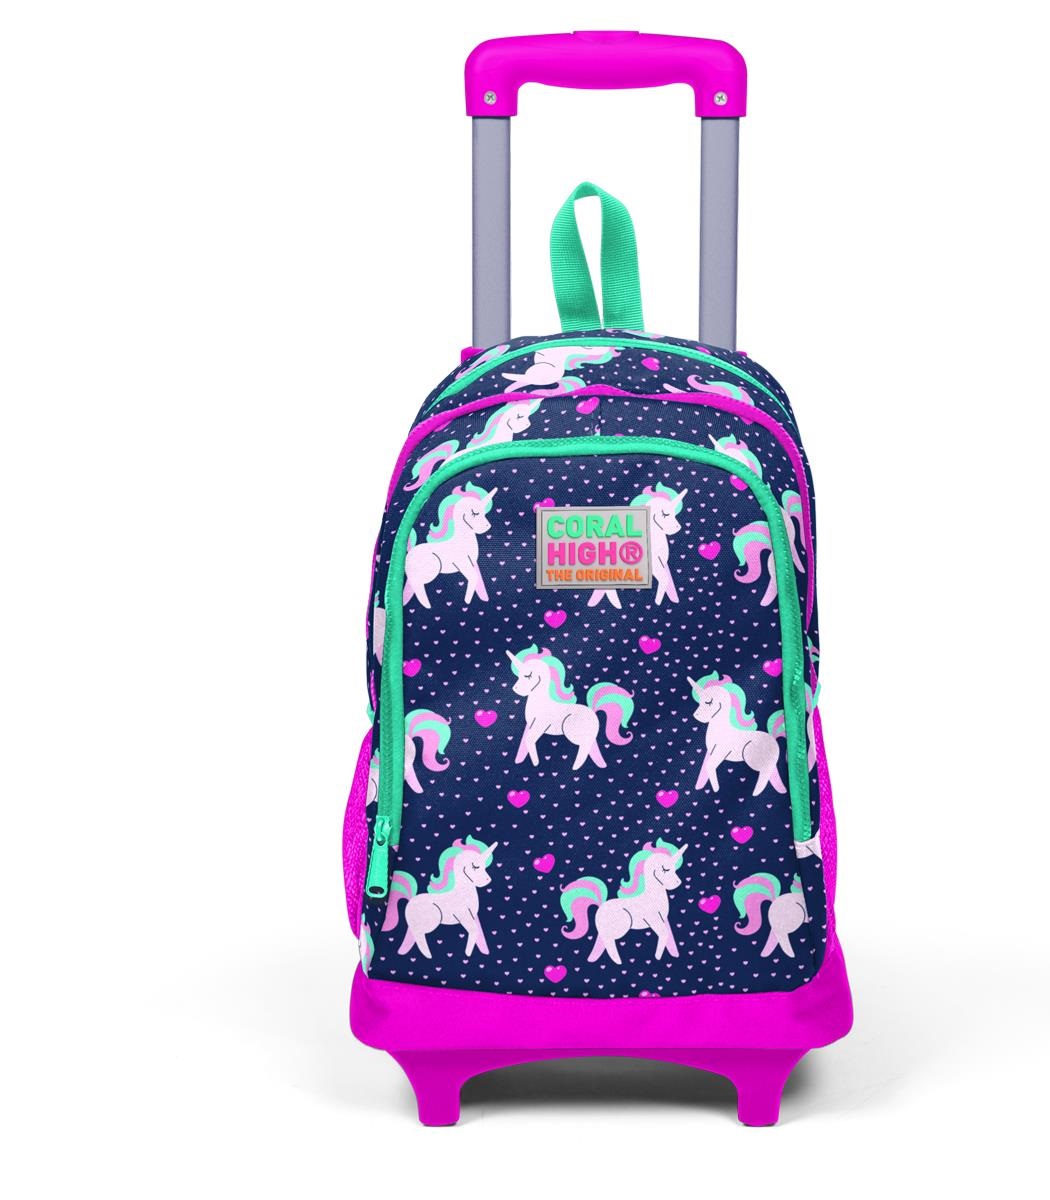 Coral High Kids Three Compartment Squeegee School Backpack - Navy Pink Unicorn Patterned